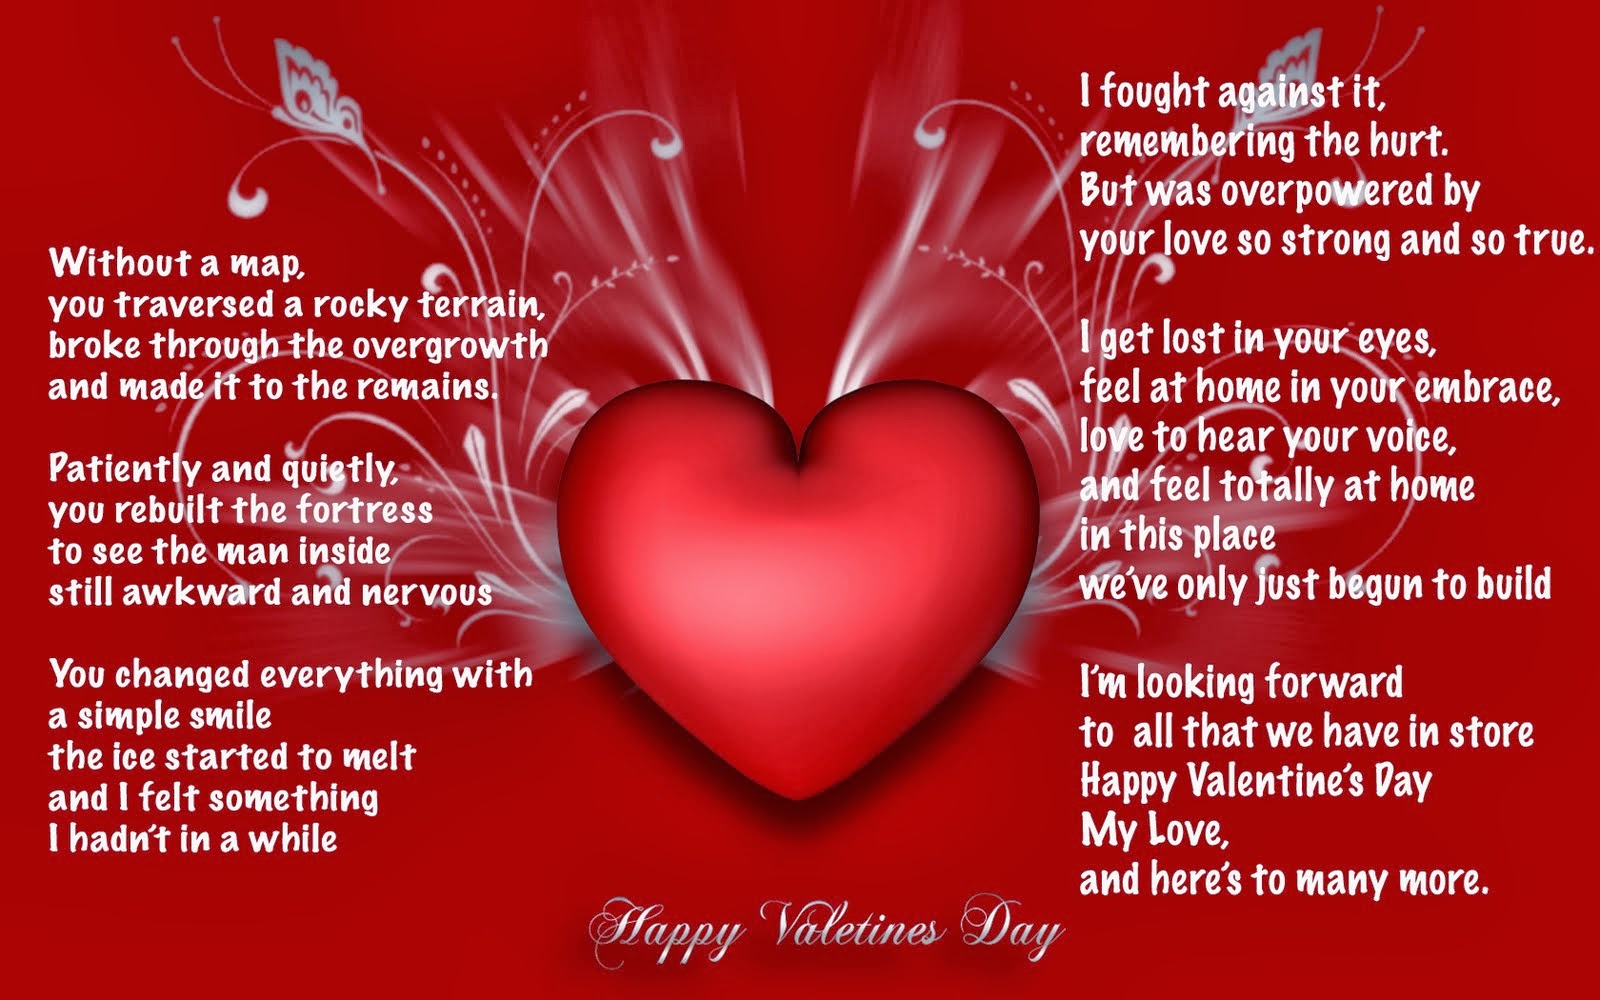 Famous Greeting Valentines Day Poems Wishes This Blog About Health